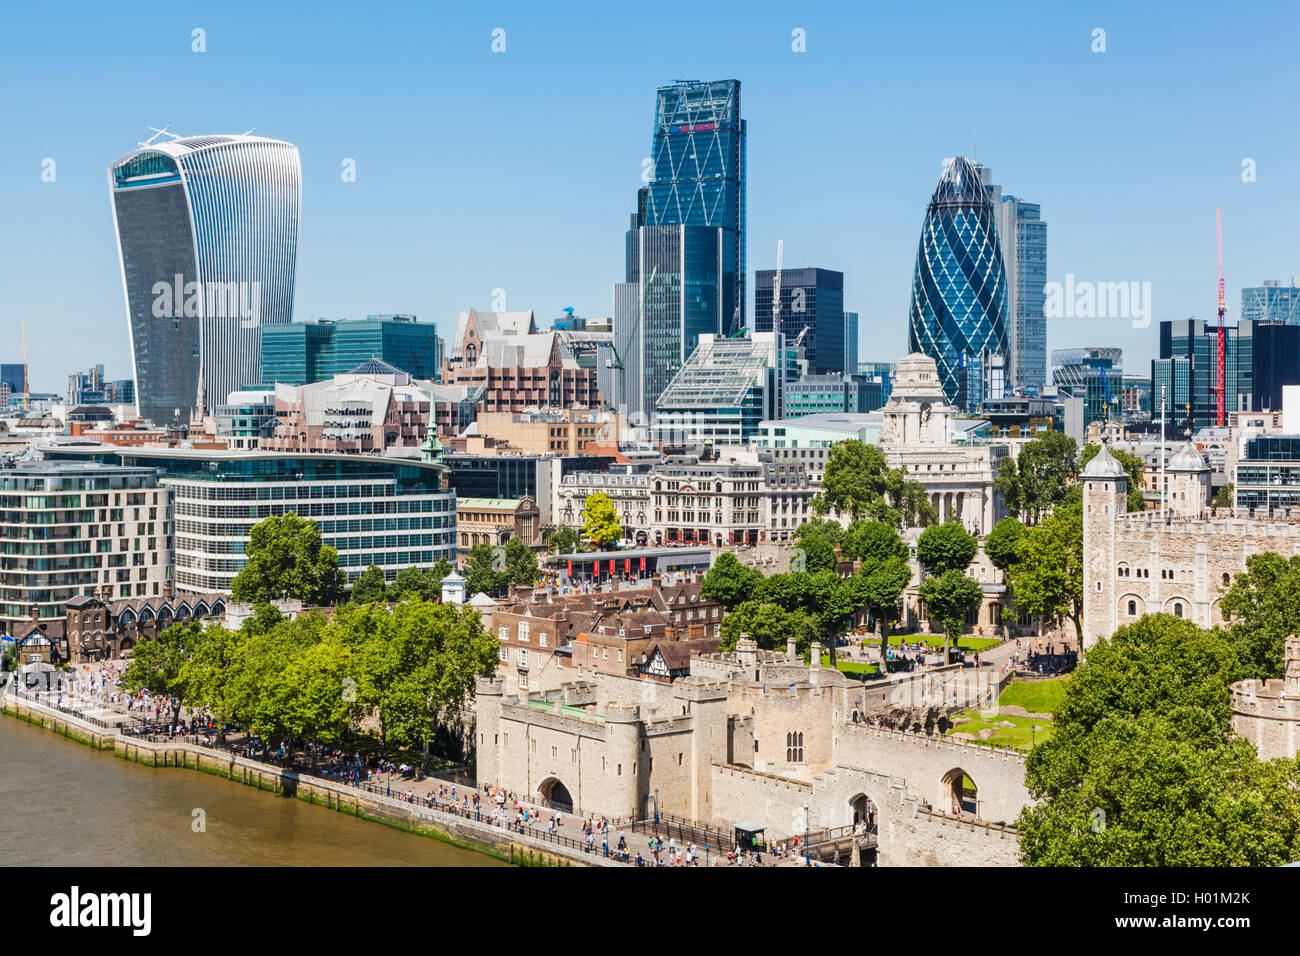 England, London, City Skyline and Thames River from Tower Bridge Stock Photo